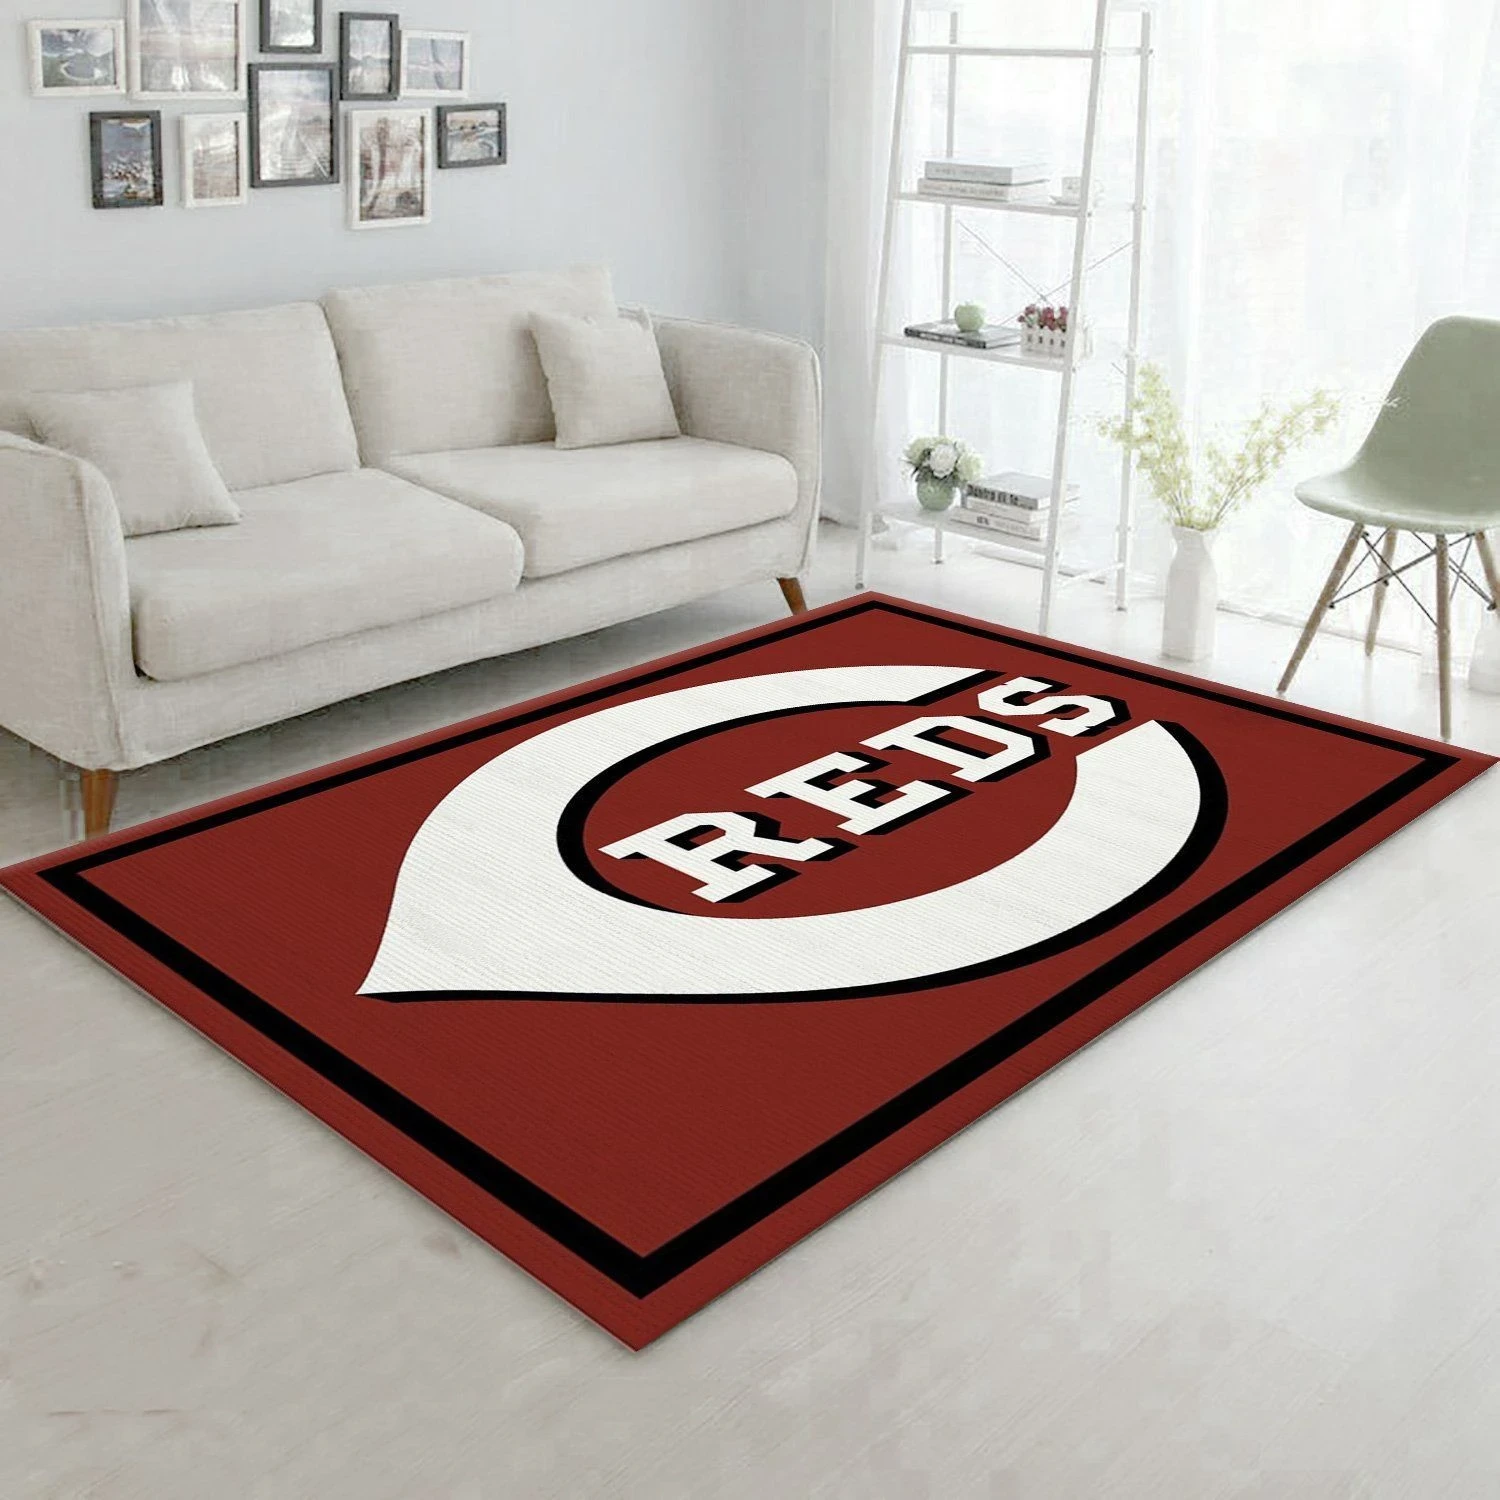 Cincinnati Reds Imperial Spirit MLB Rug Area Rug, Living room and bedroom Rug, Family Gift US Decor - Indoor Outdoor Rugs 2